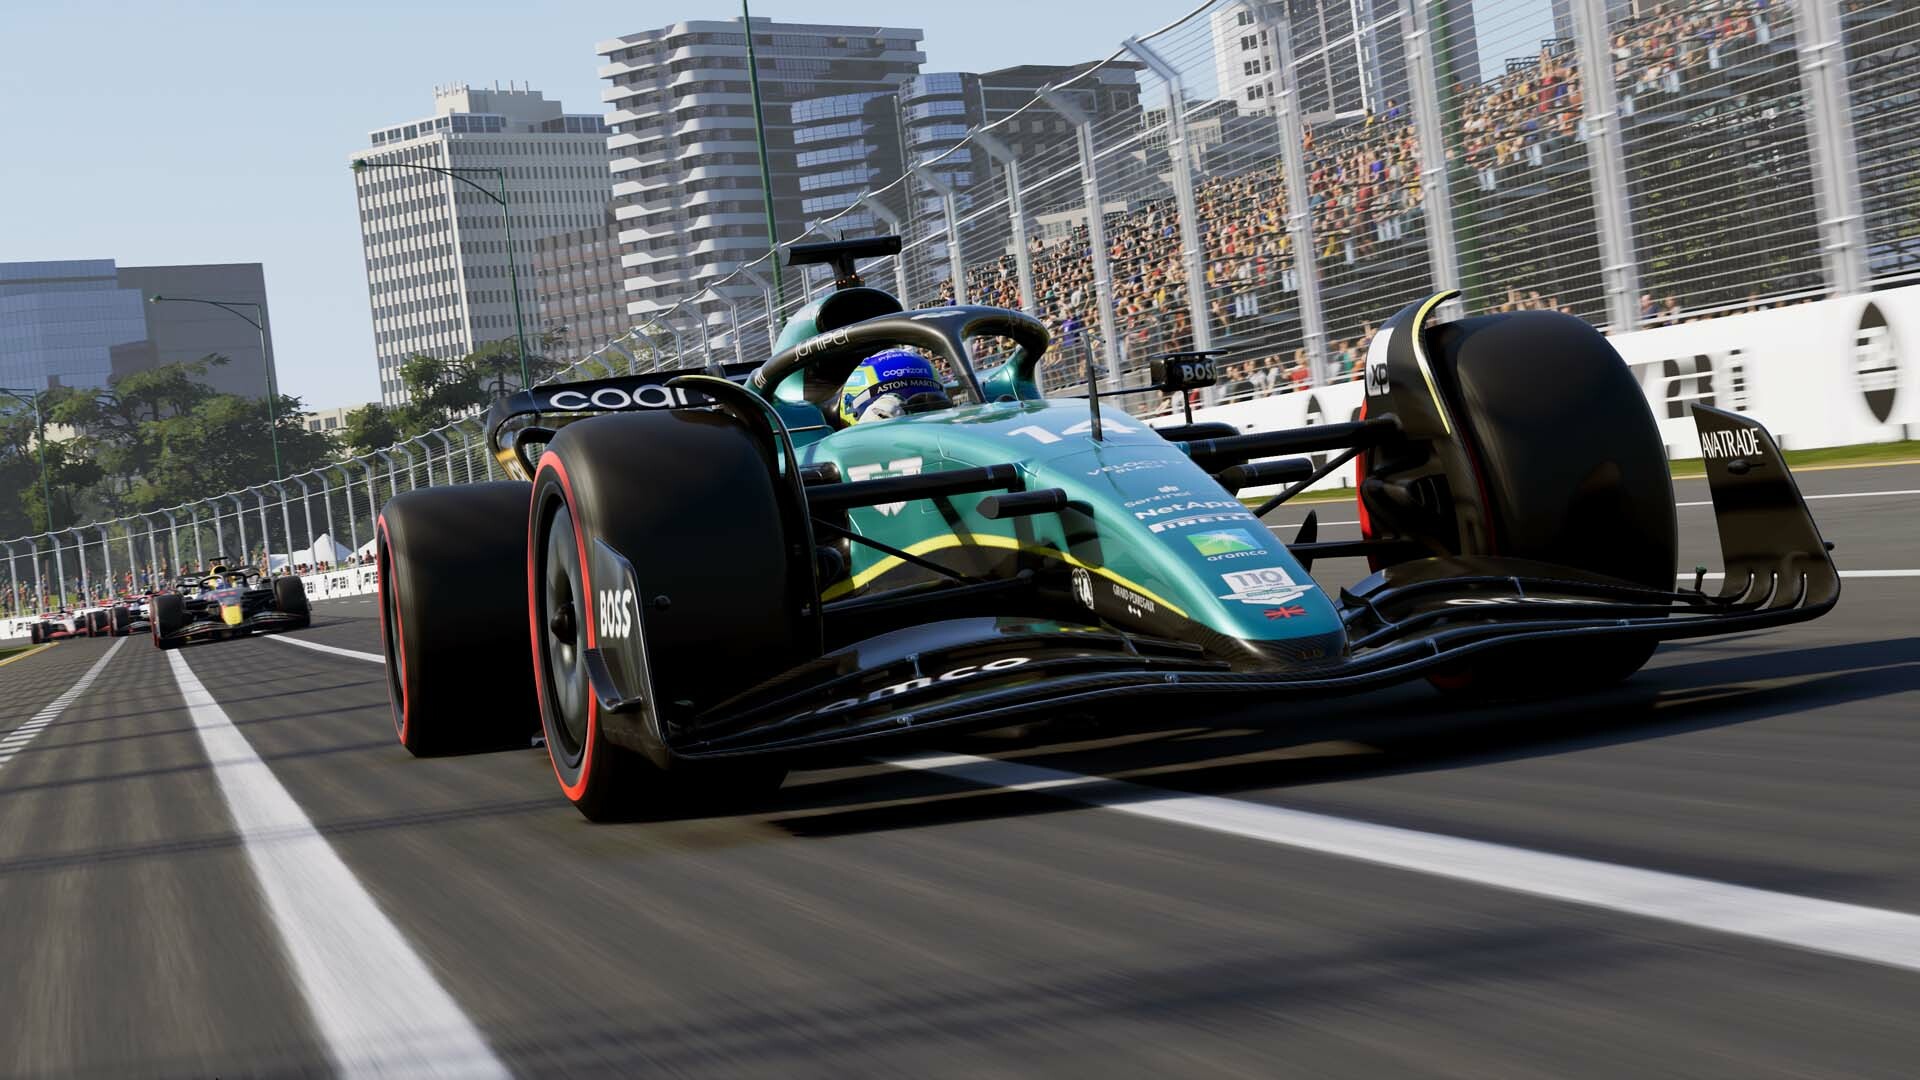 Is F1 22 crossplay yet? Find out here!